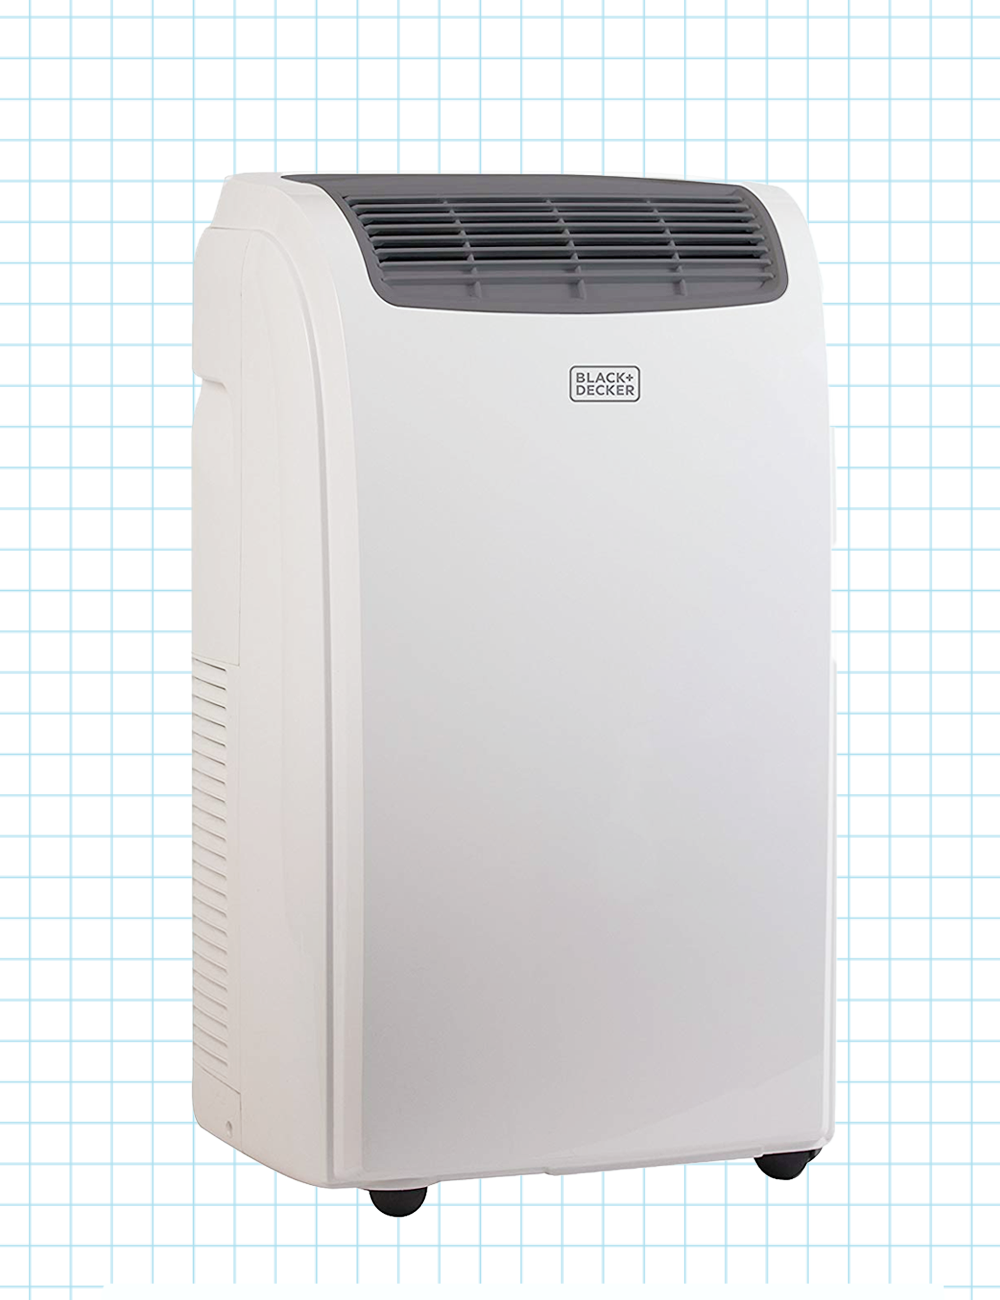 9 Best Portable Air Conditioners to Buy 